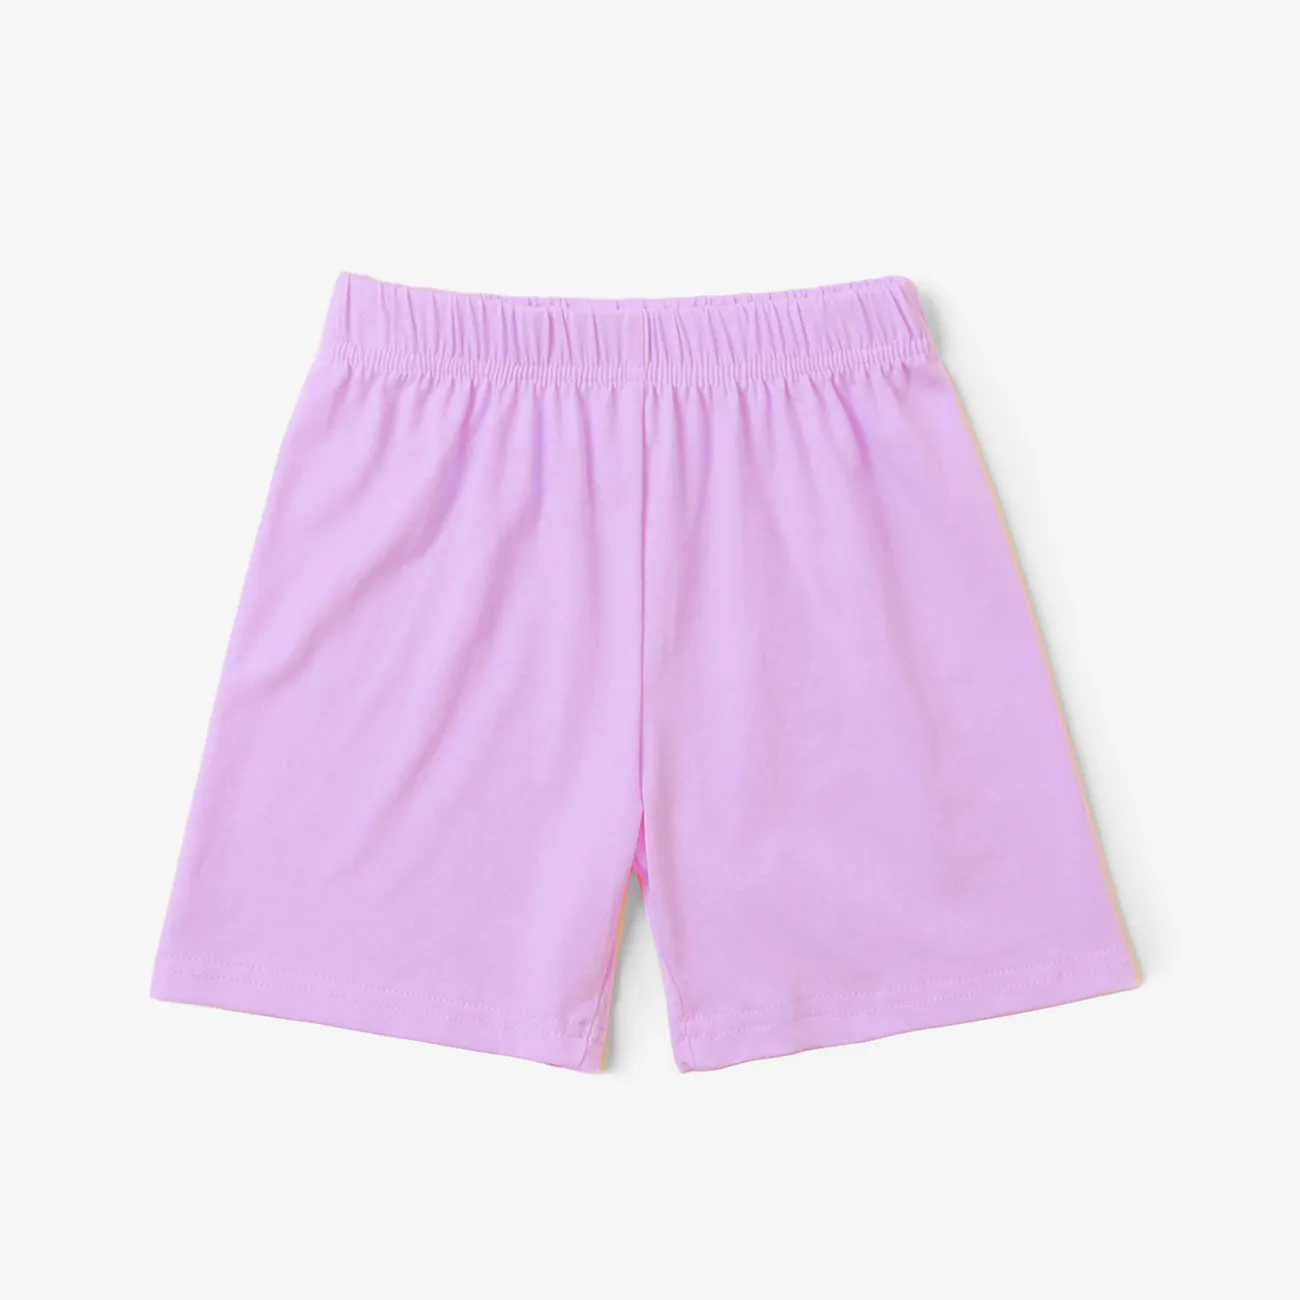 Toddler Boy/Girl 2pcs Cotton Solid Color Tee and Shorts Set Light Purple big image 1